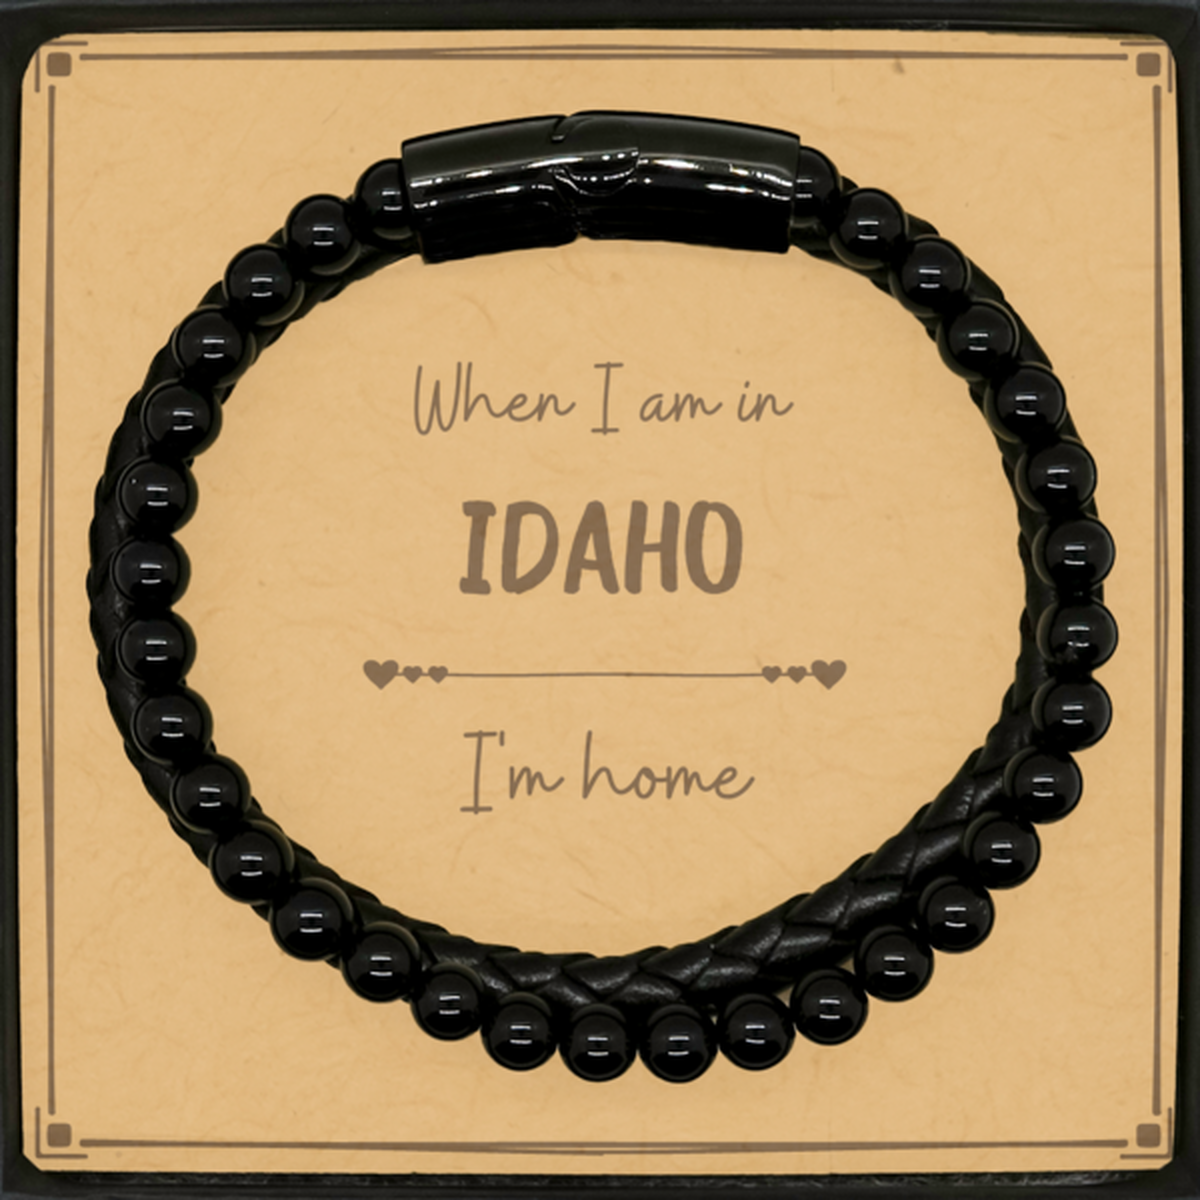 When I am in Idaho I'm home Stone Leather Bracelets, Message Card Gifts For Idaho, State Idaho Birthday Gifts for Friends Coworker